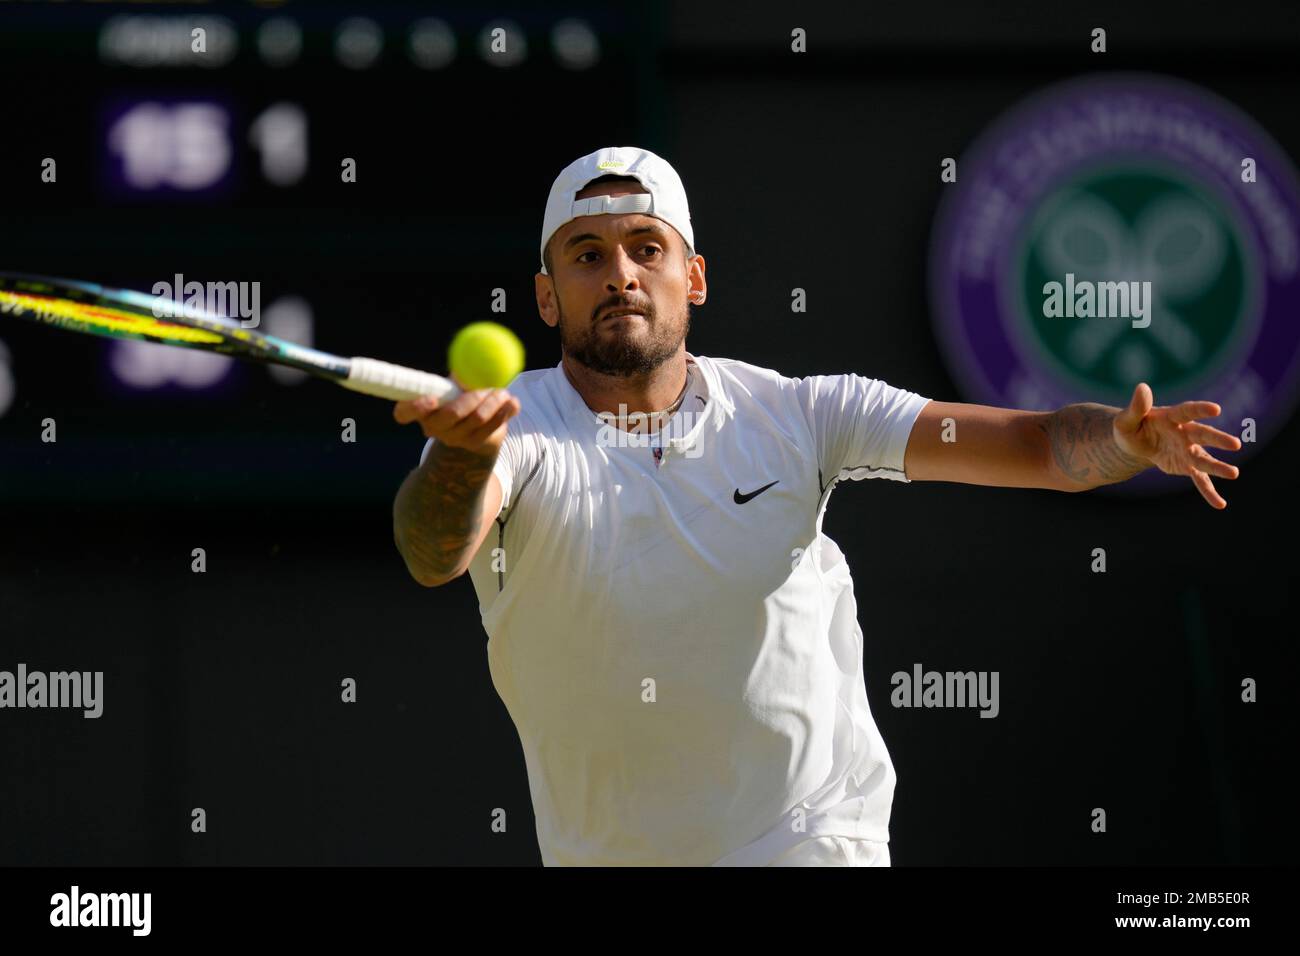 Australias Nick Kyrgios returns the ball to Greeces Stefanos Tsitsipas during a third round mens singles match on day six of the Wimbledon tennis championships in London, Saturday, July 2, 2022